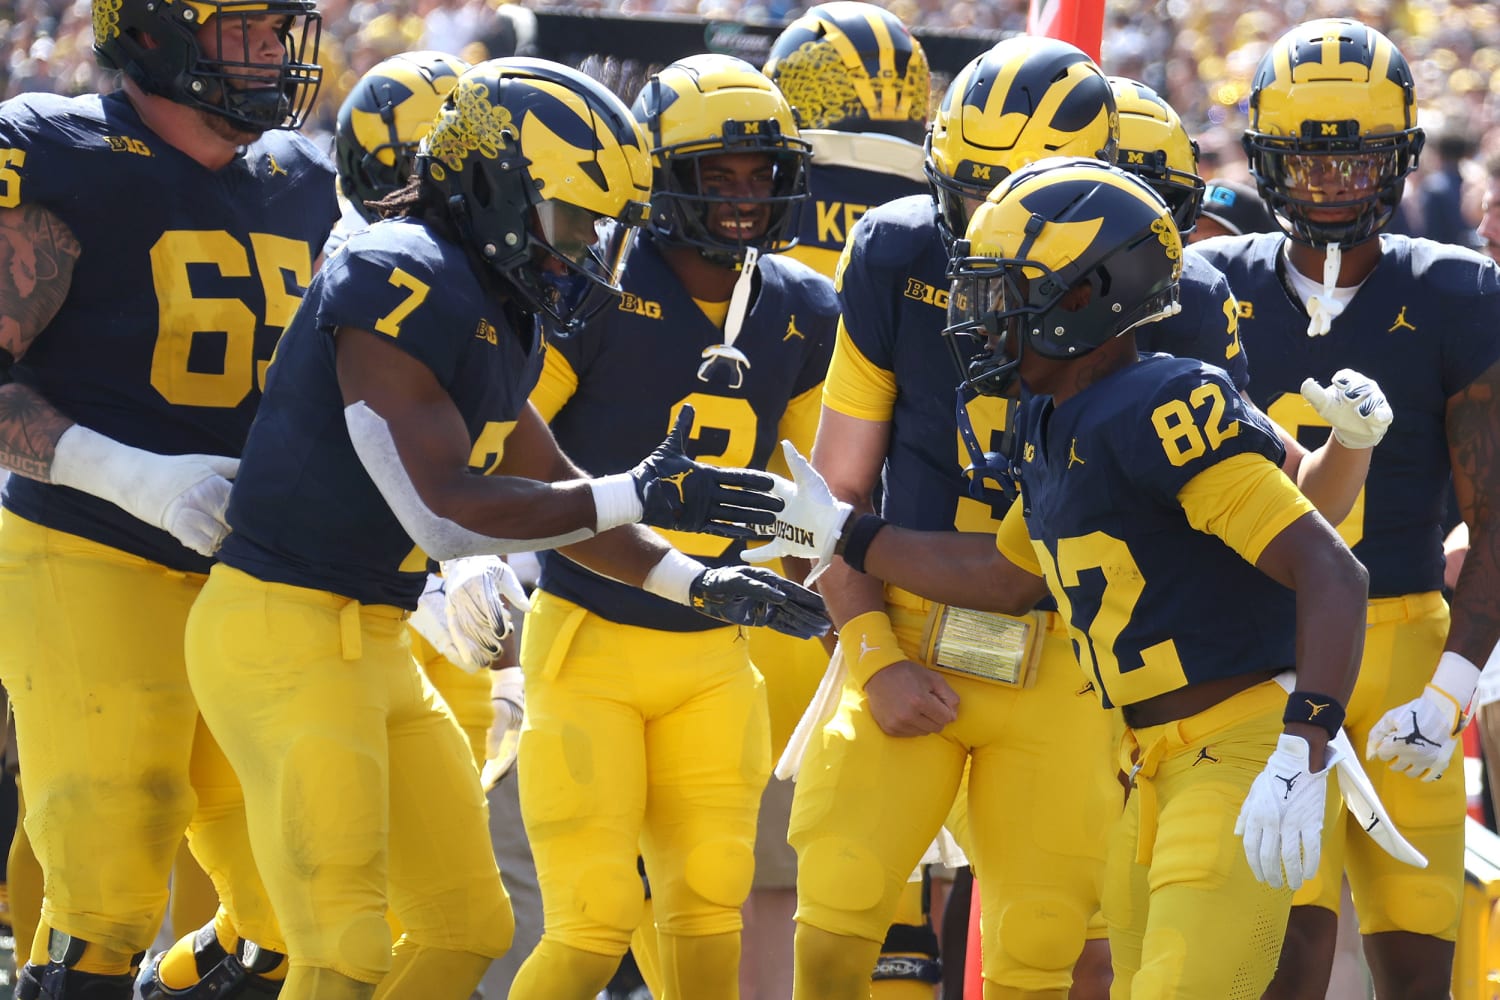 NCAA investigation launched on Michigan football team over sign-stealing  allegations